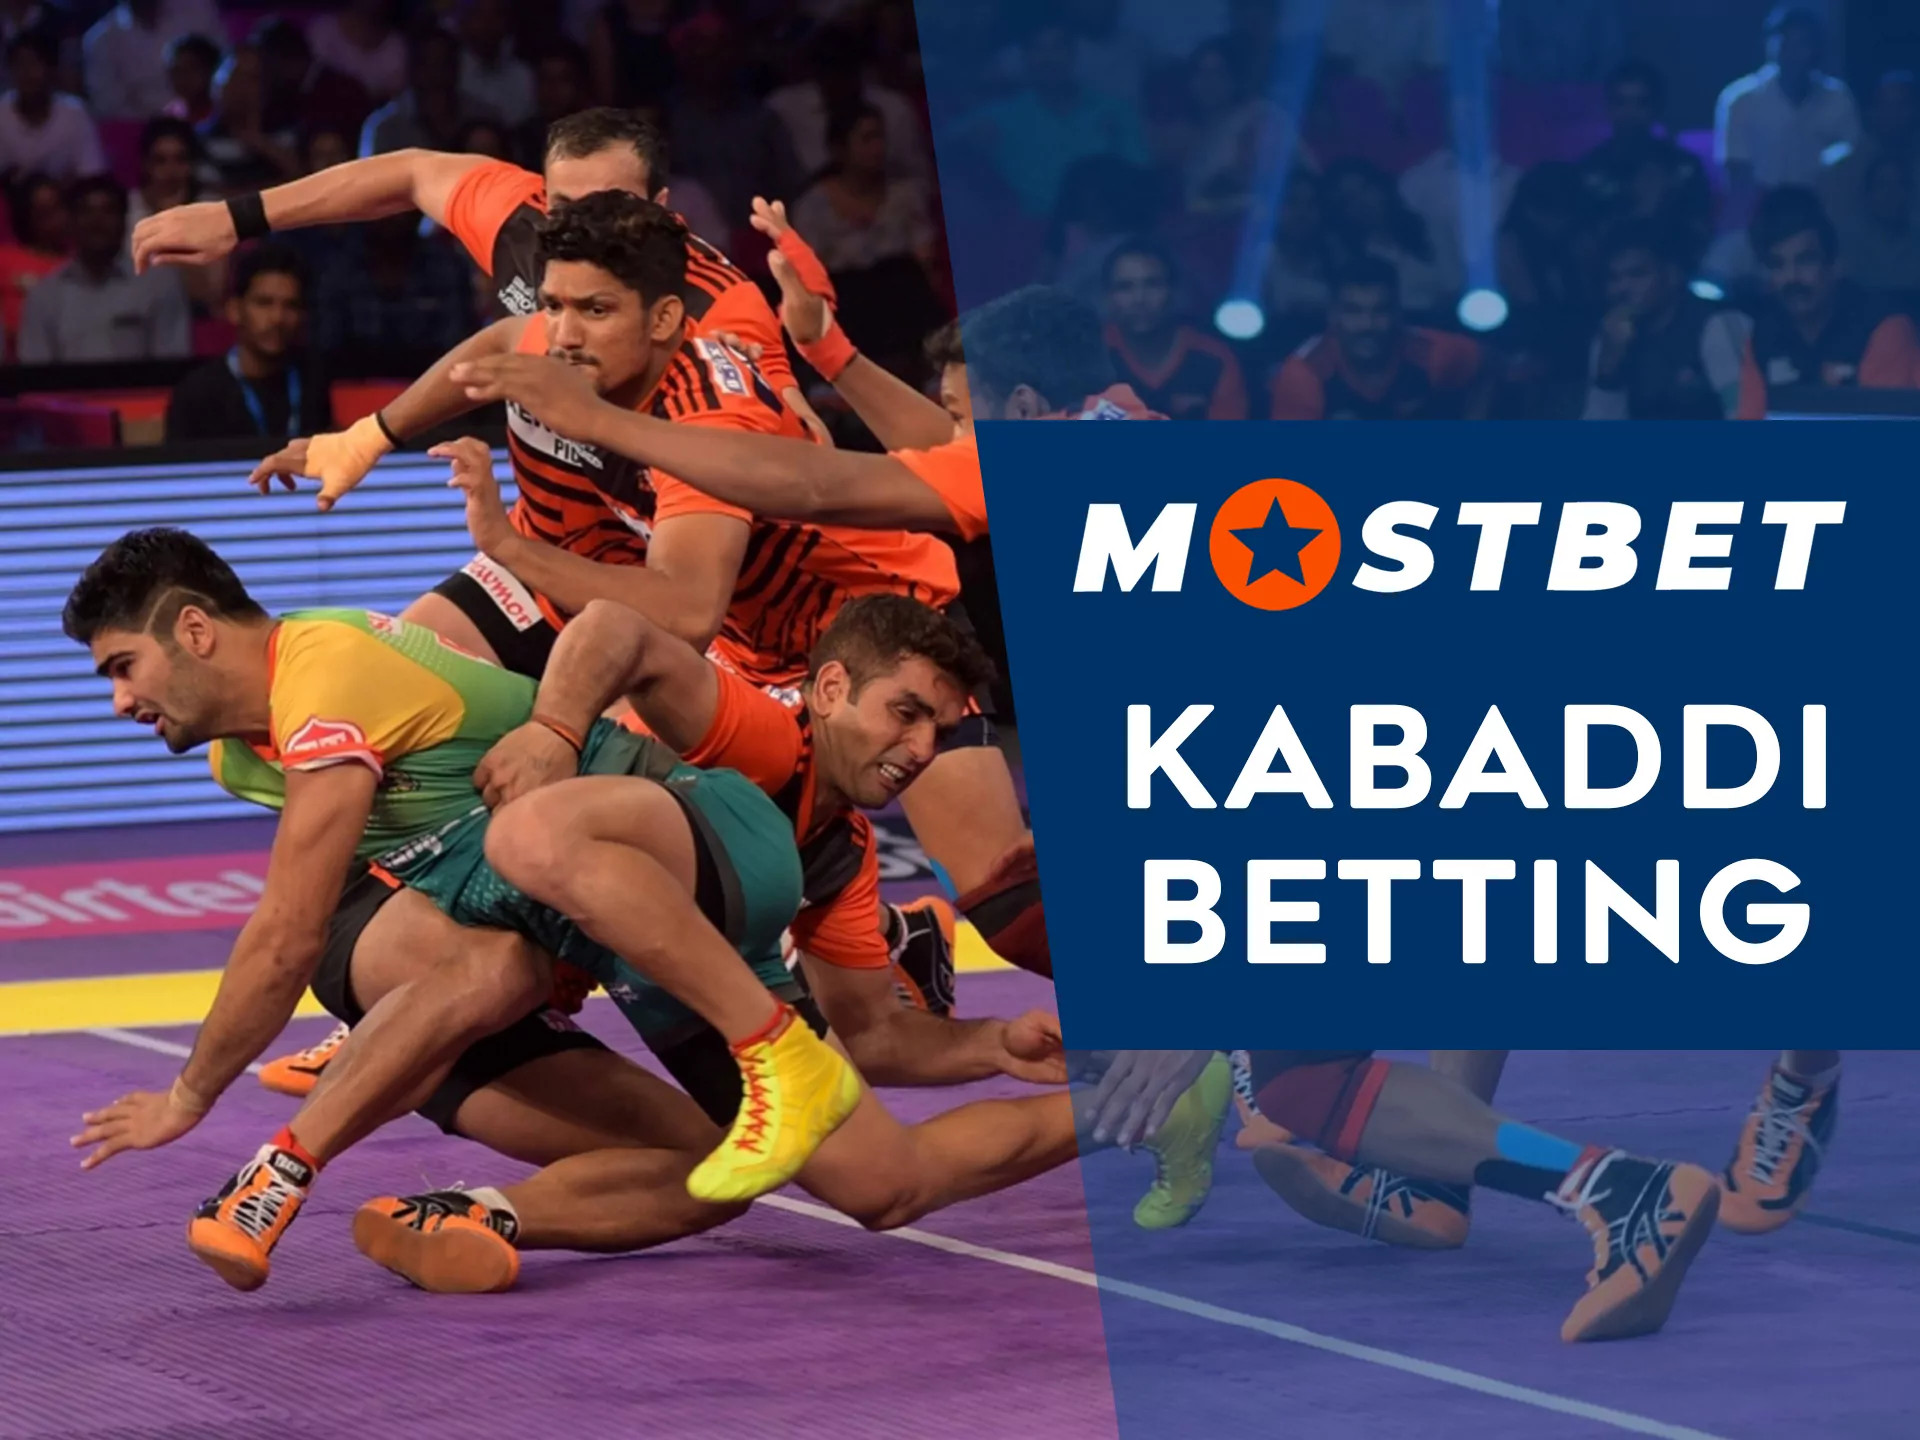 The discipline of kabaddi has rapidly gained a popularity in Asian, and you can place a bet on kabaddi with Mostbet.